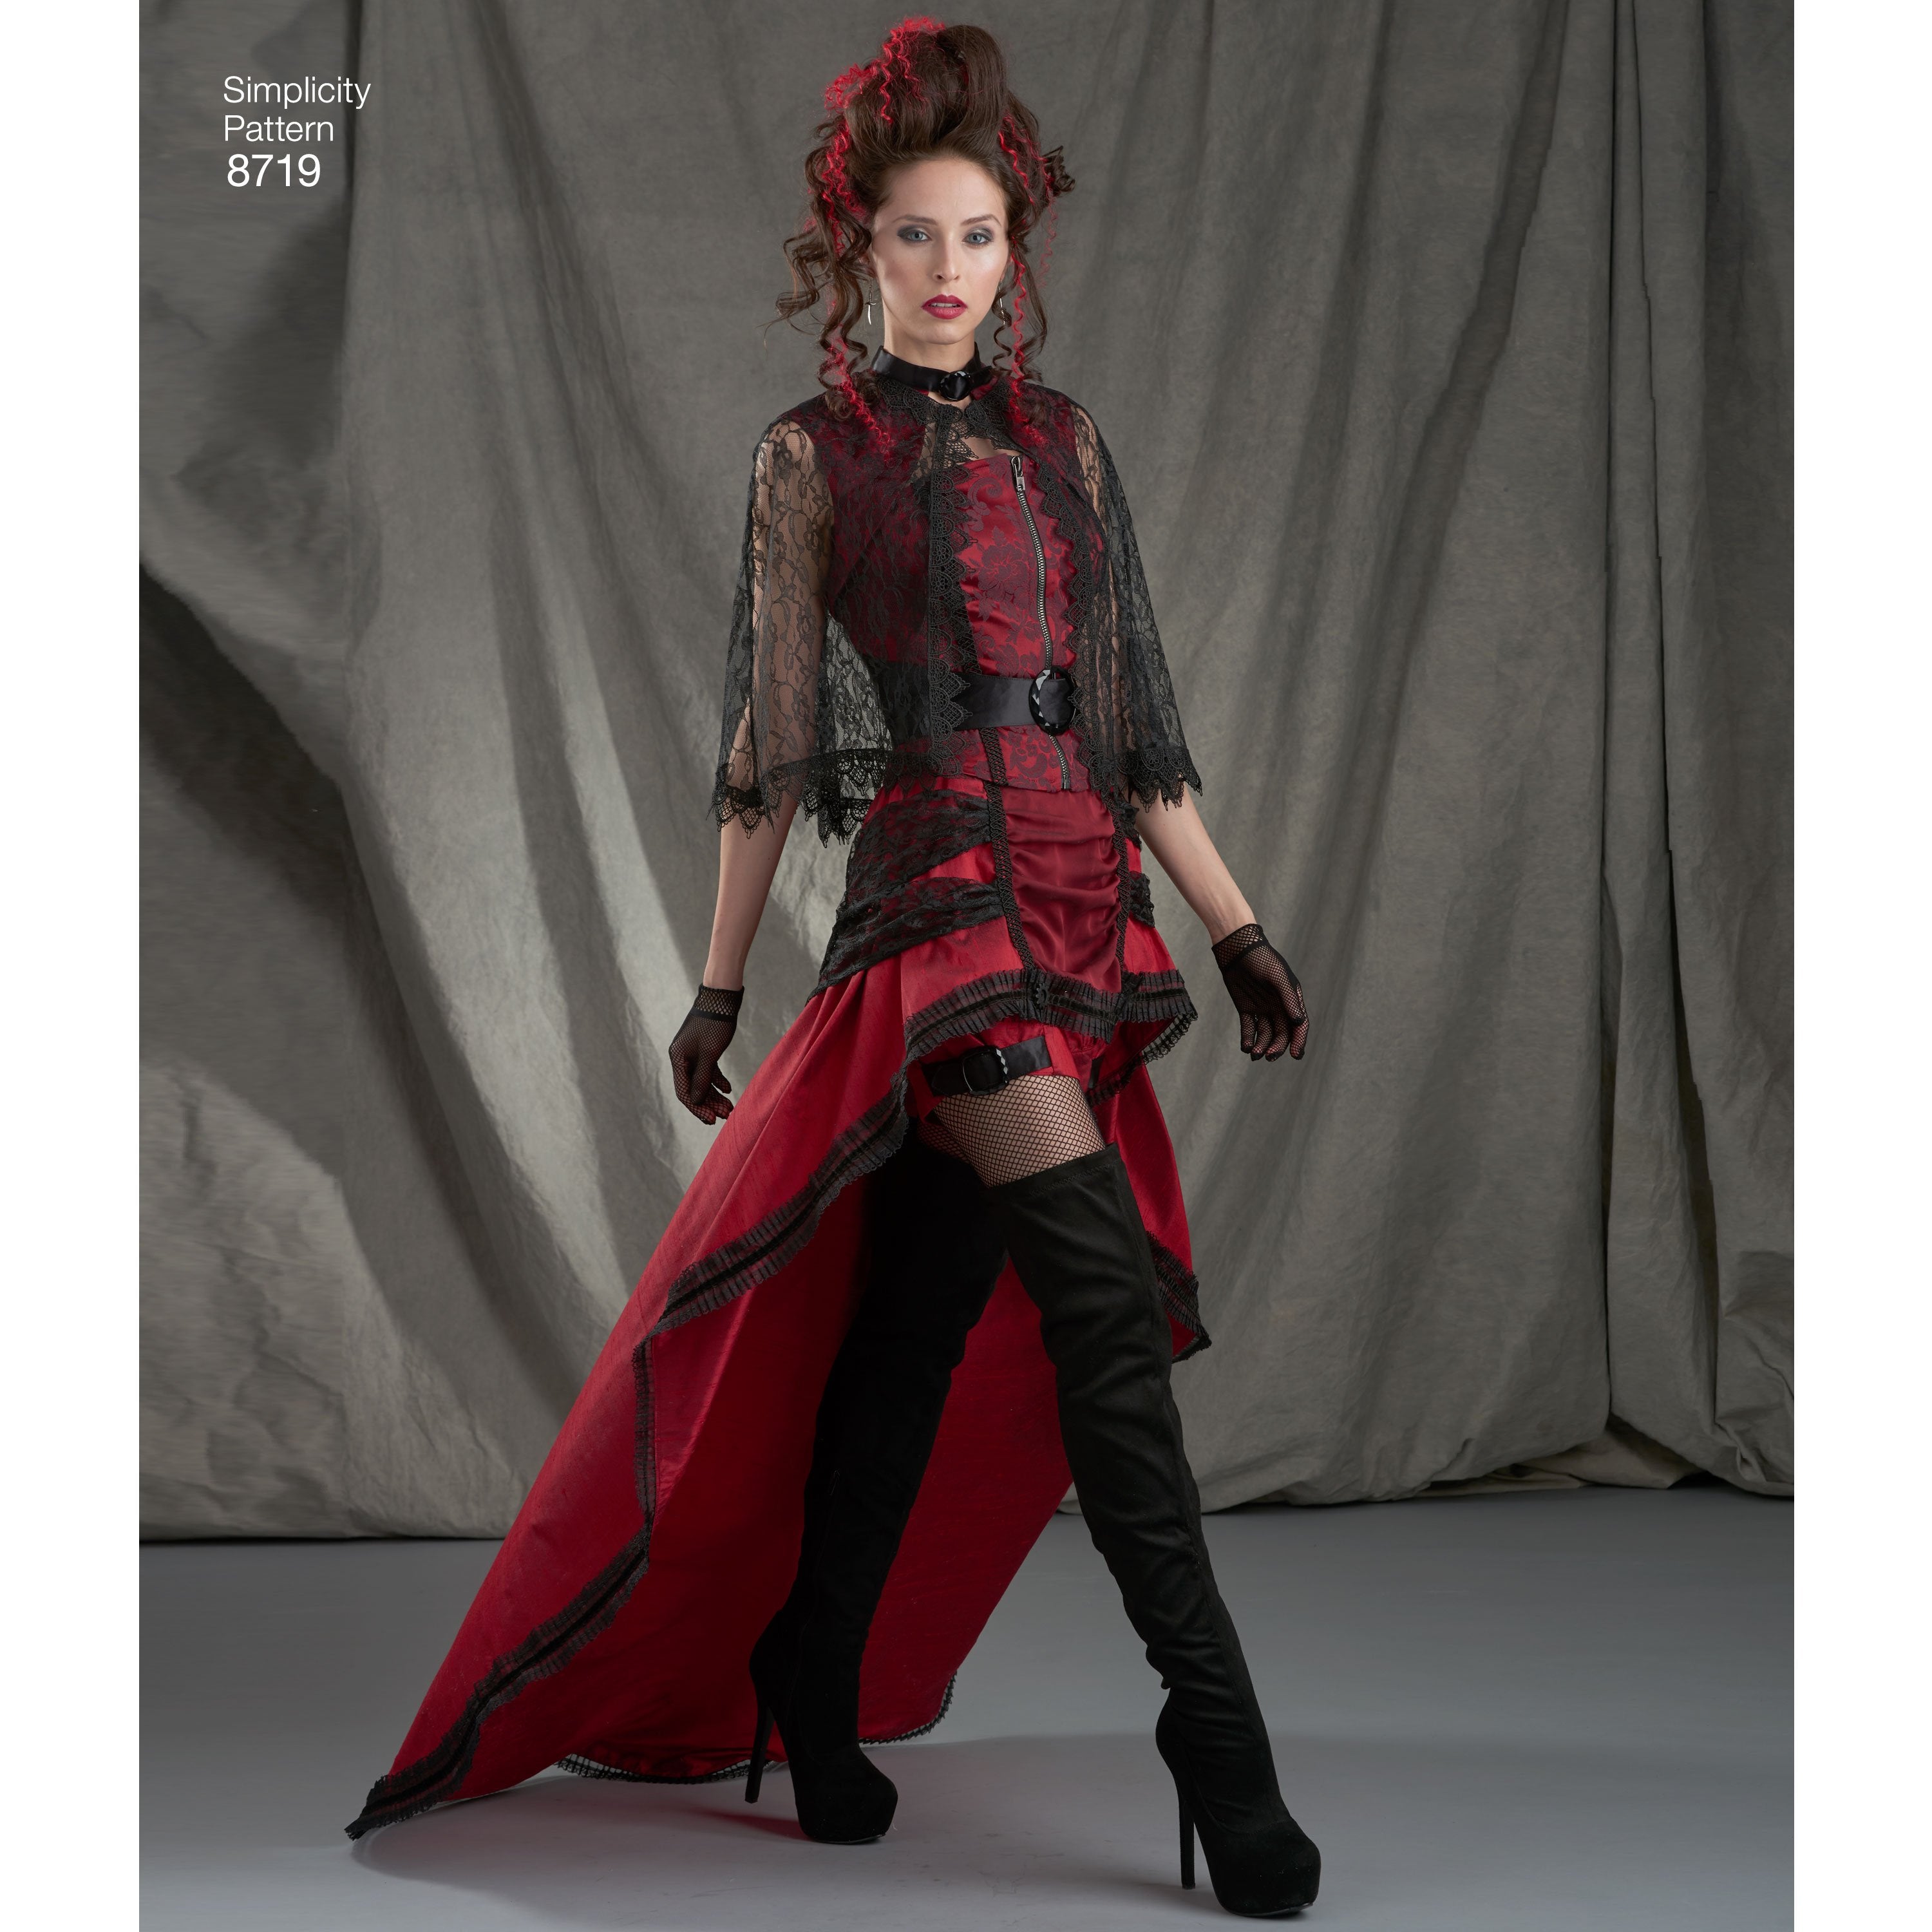 Simplicity Pattern 8719 steampunk-costumes from Jaycotts Sewing Supplies